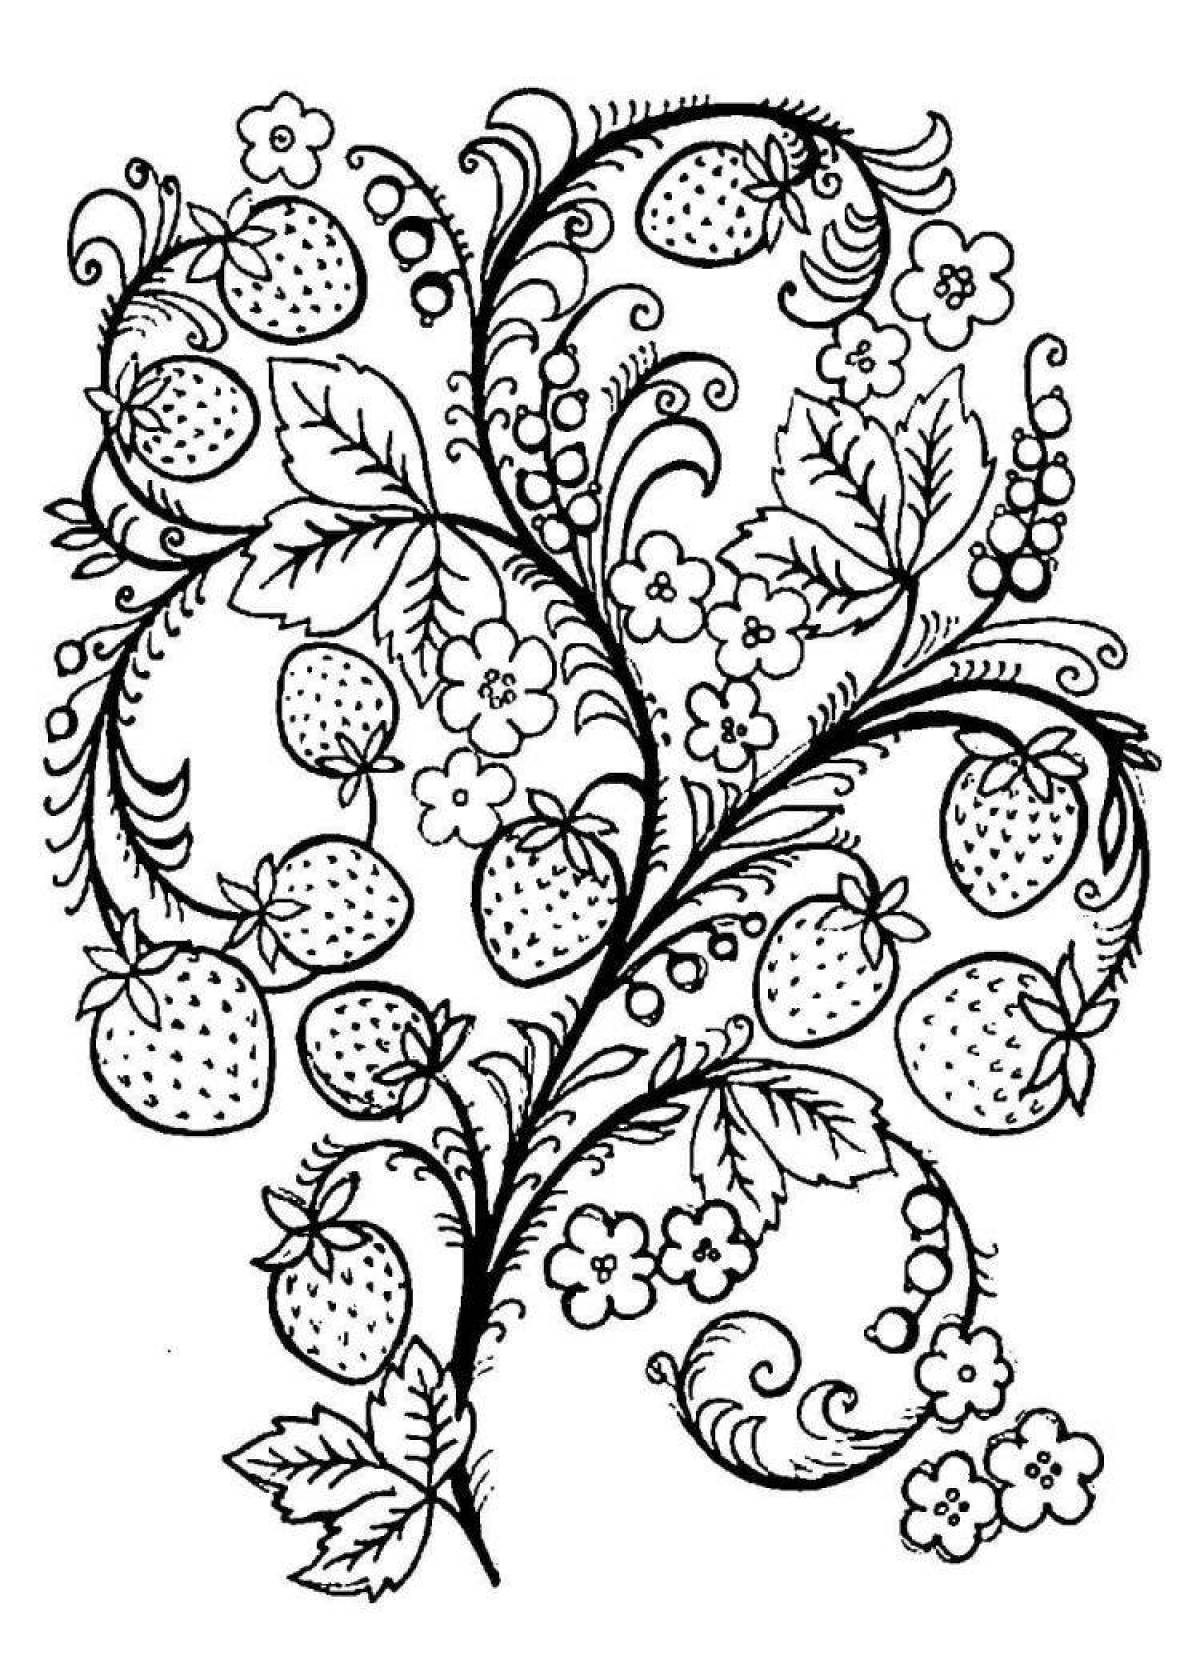 Coloring book exquisite folk pattern